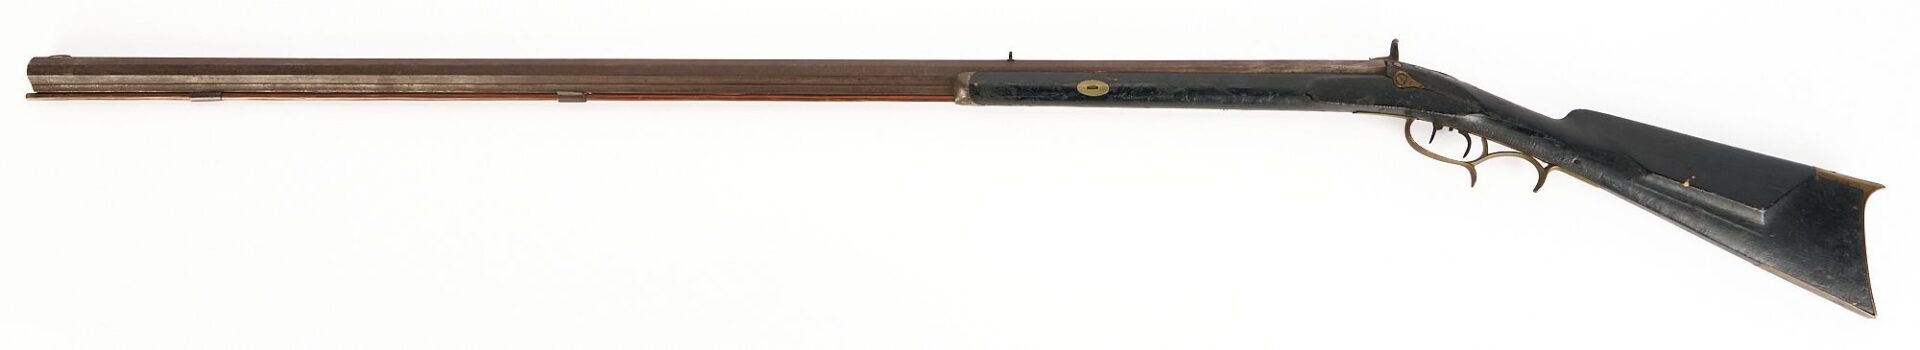 Lot 533: Kentucky Half Stock .36 cal. Percussion Rifle; J. Griffith, Louisville